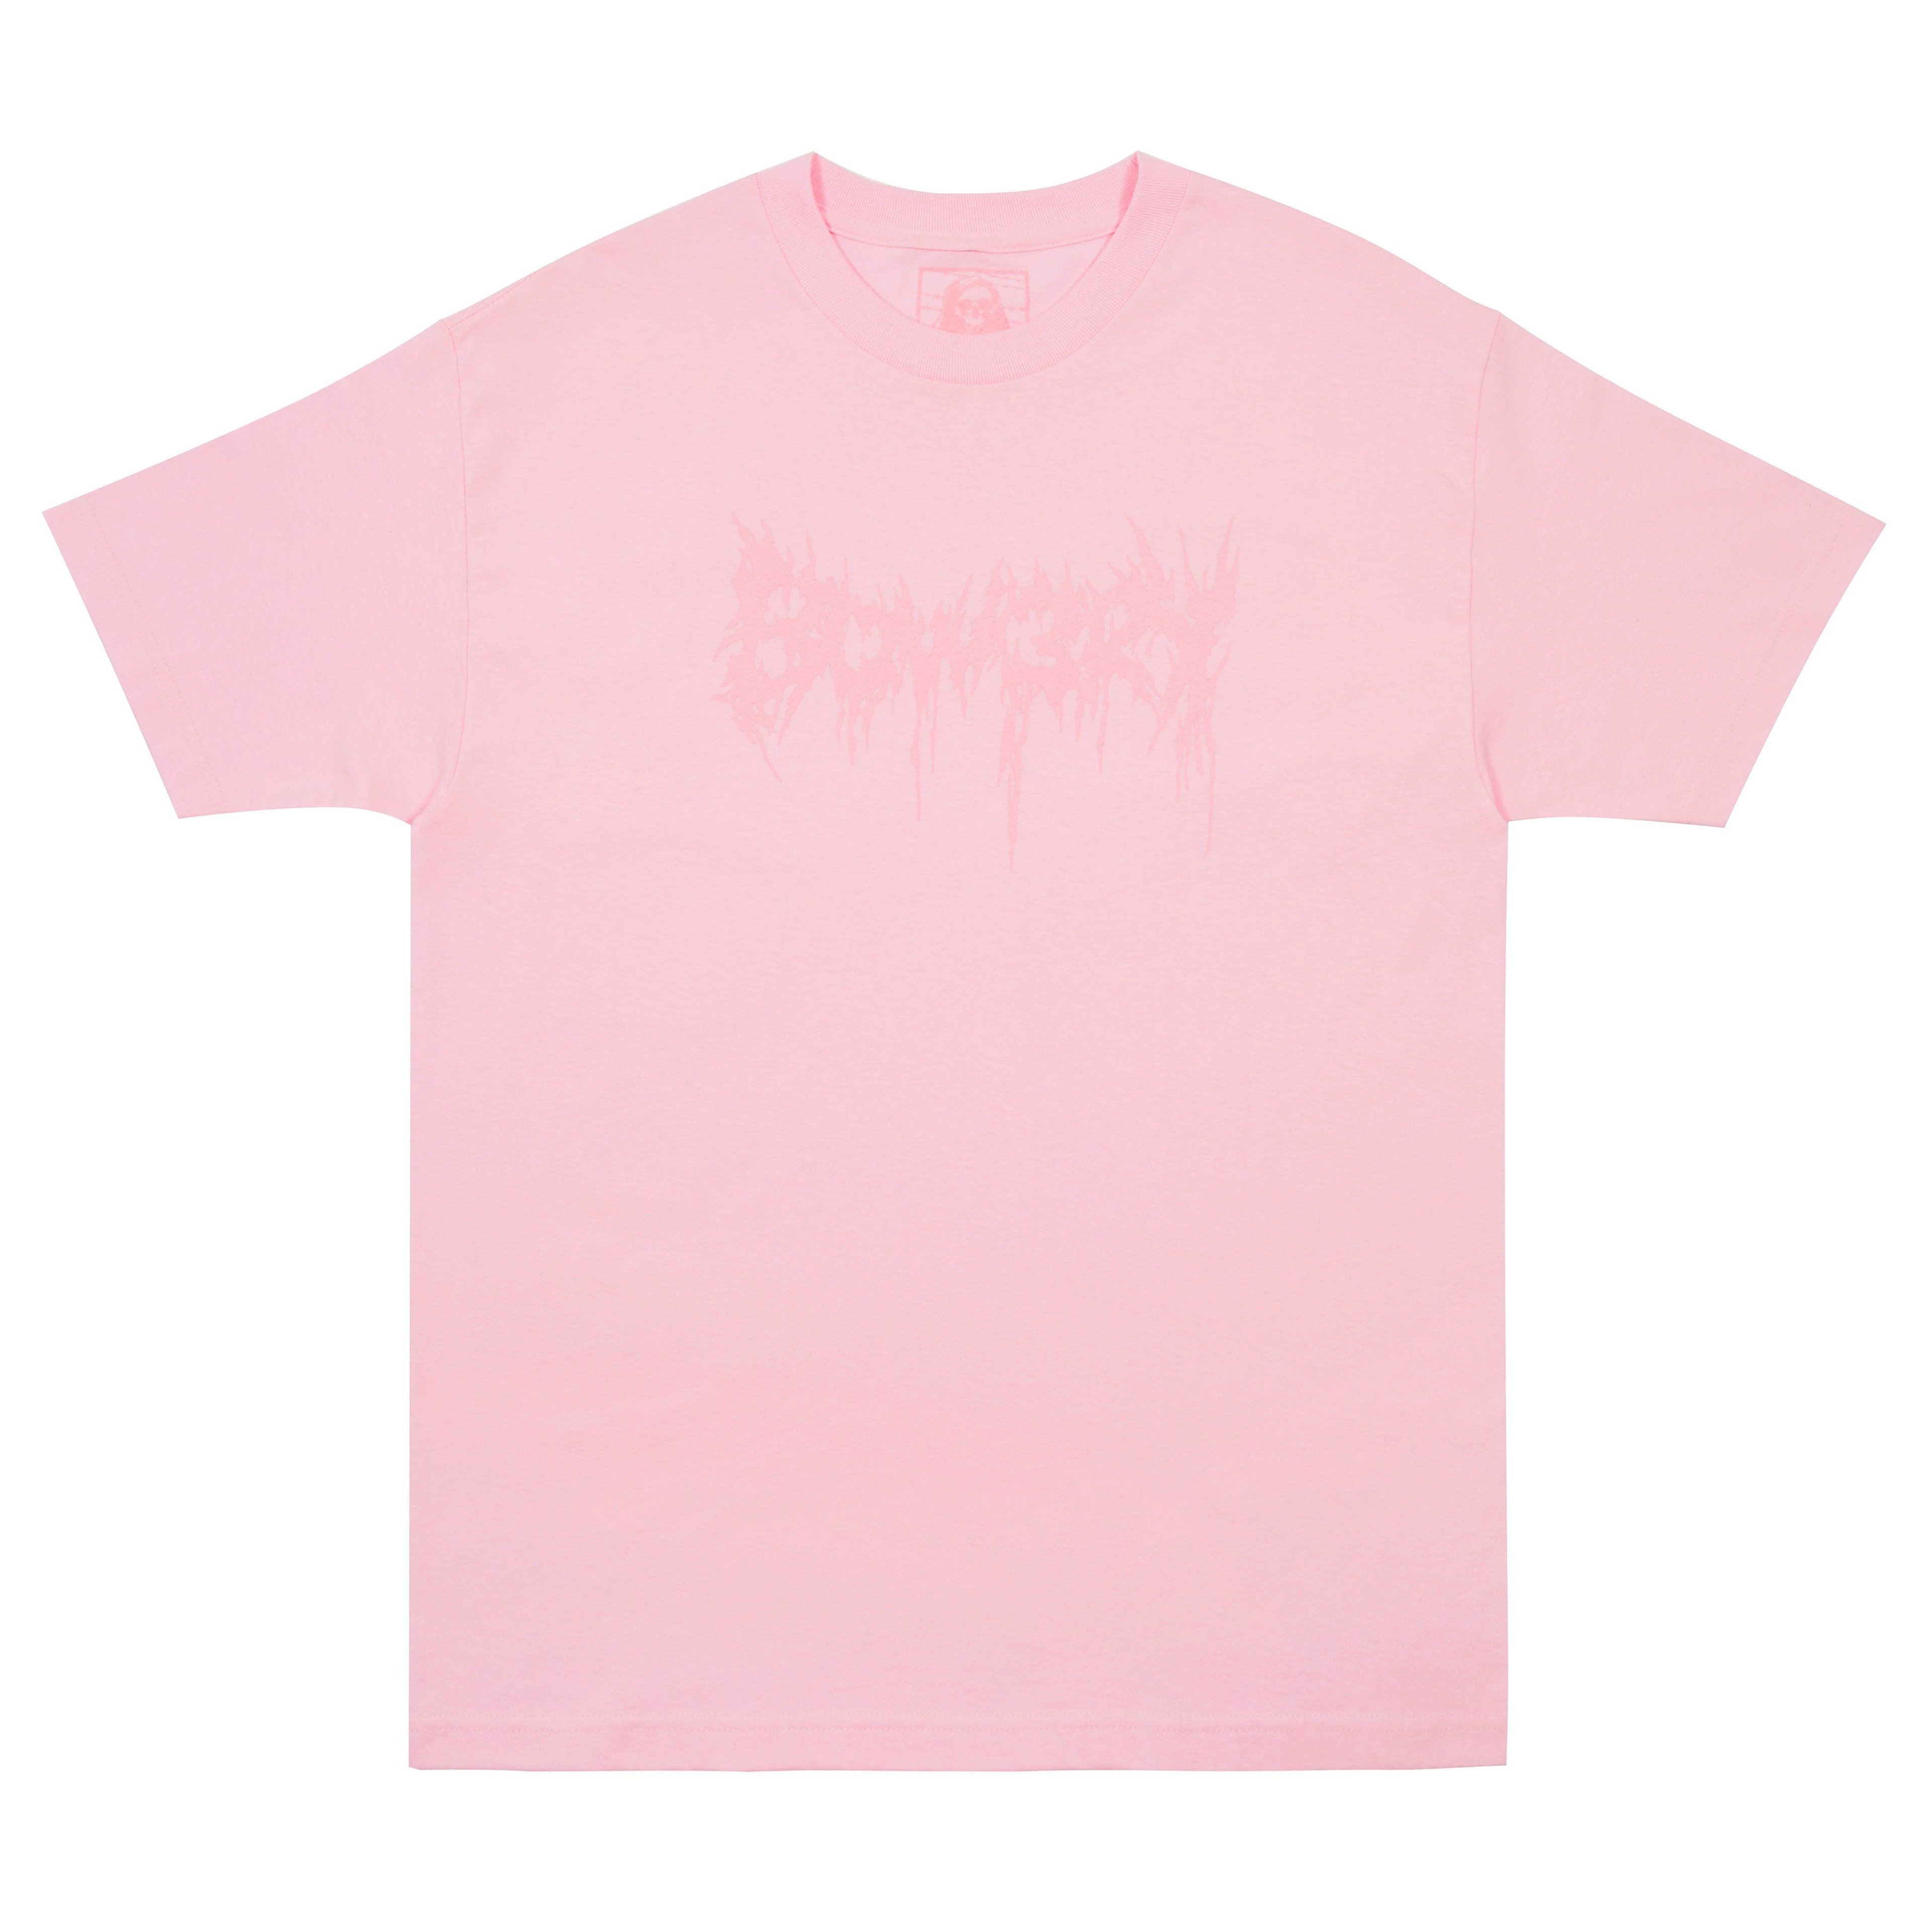 Bow3ry Grind T-Shirt (Pink) by BOW3RY